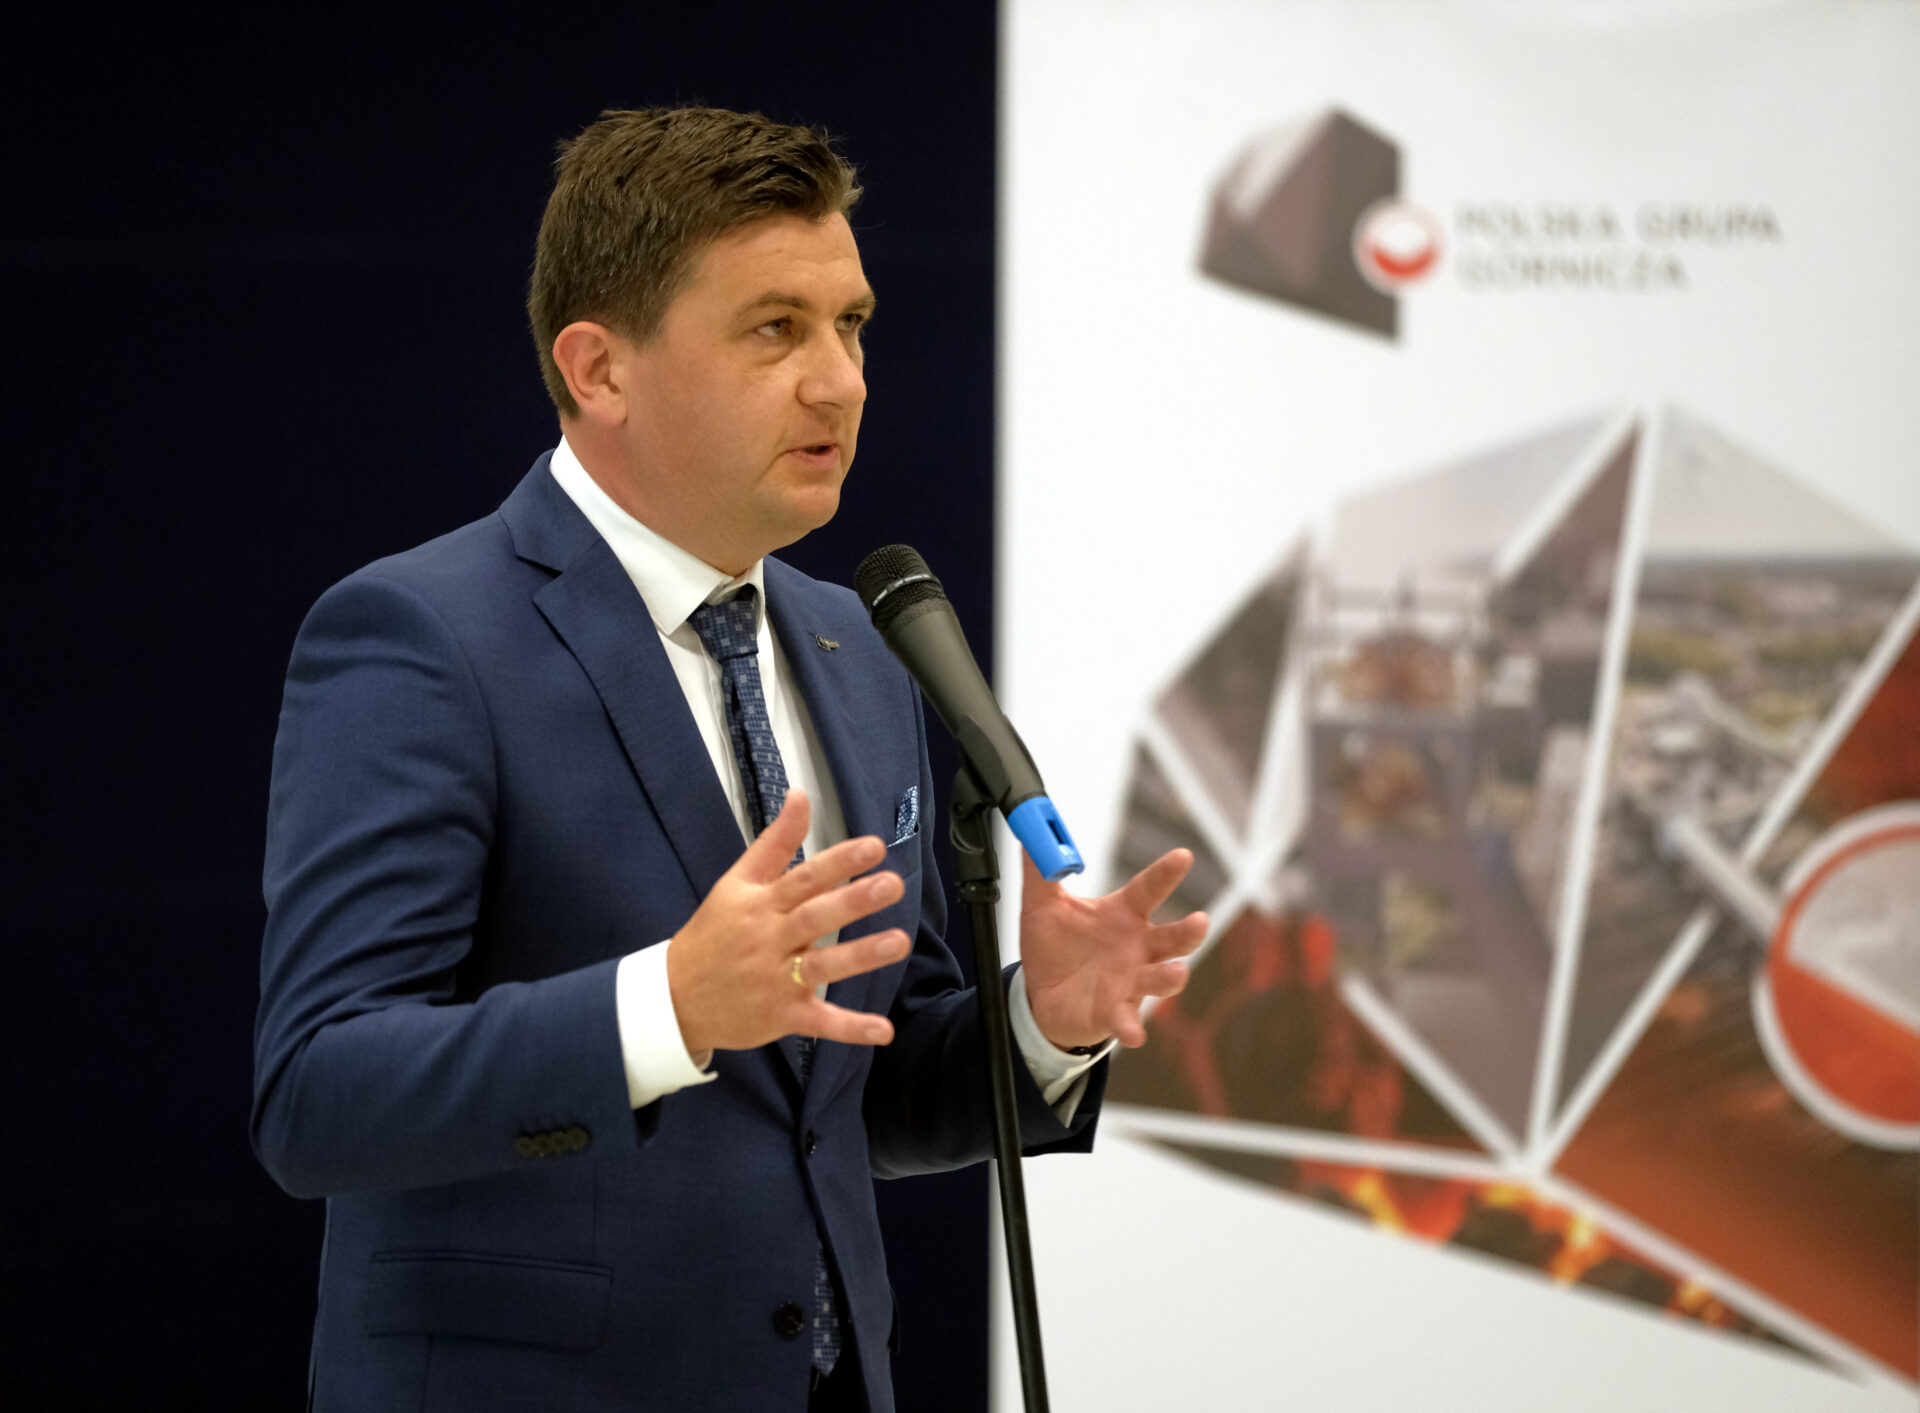 Tomasz Rogala, the President of the Polish Mining Group S.A.